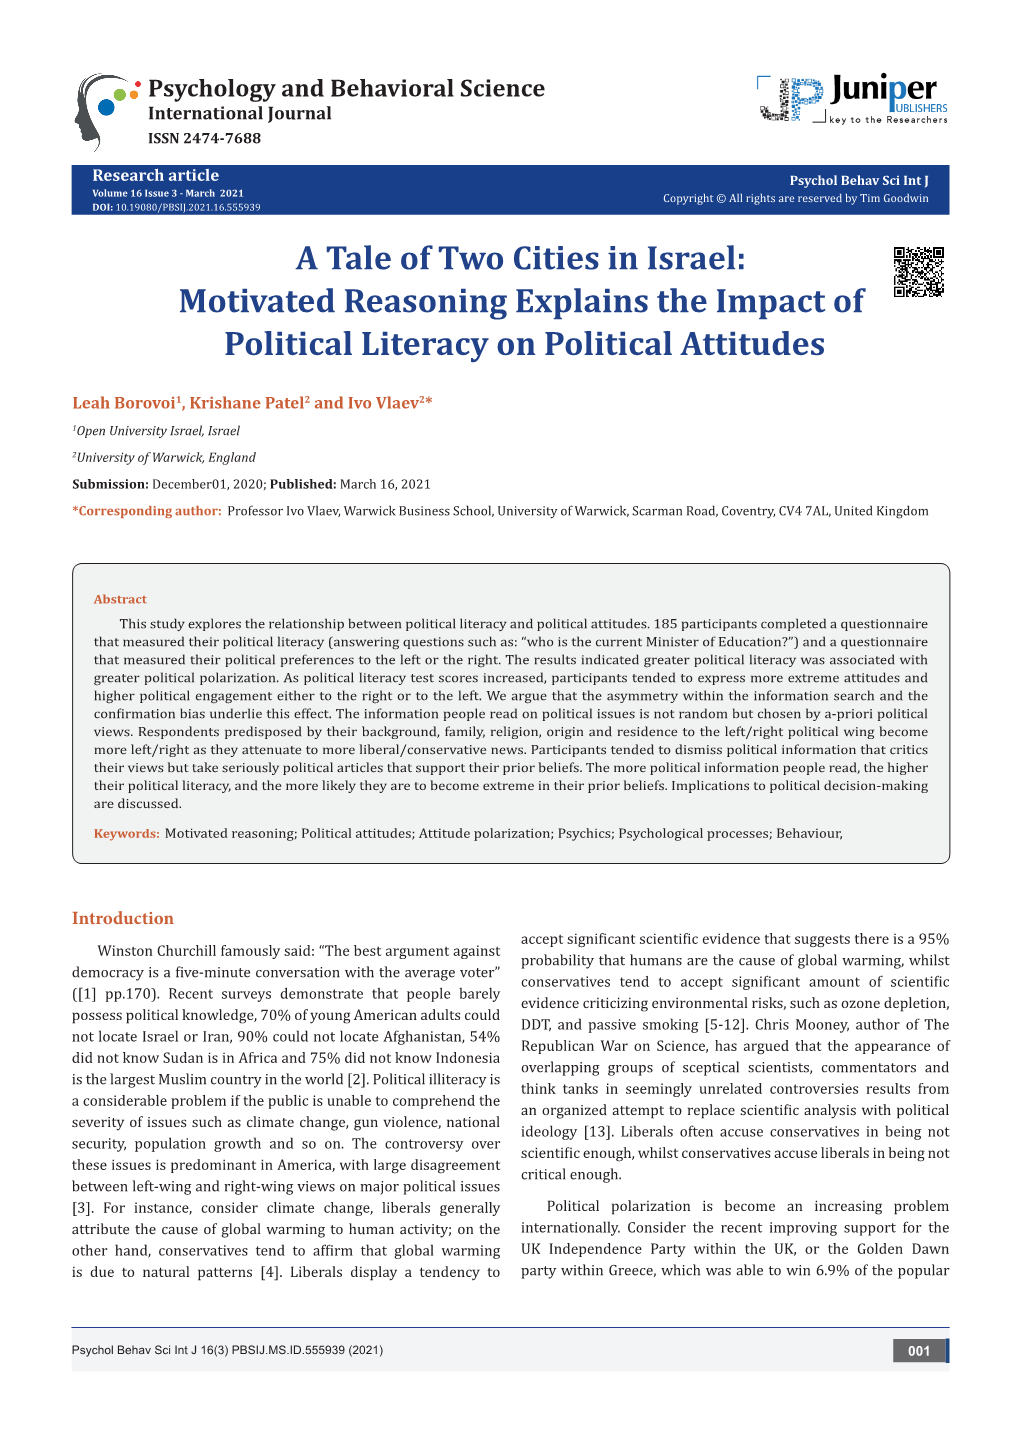 A Tale of Two Cities in Israel:Motivated Reasoning Explains The